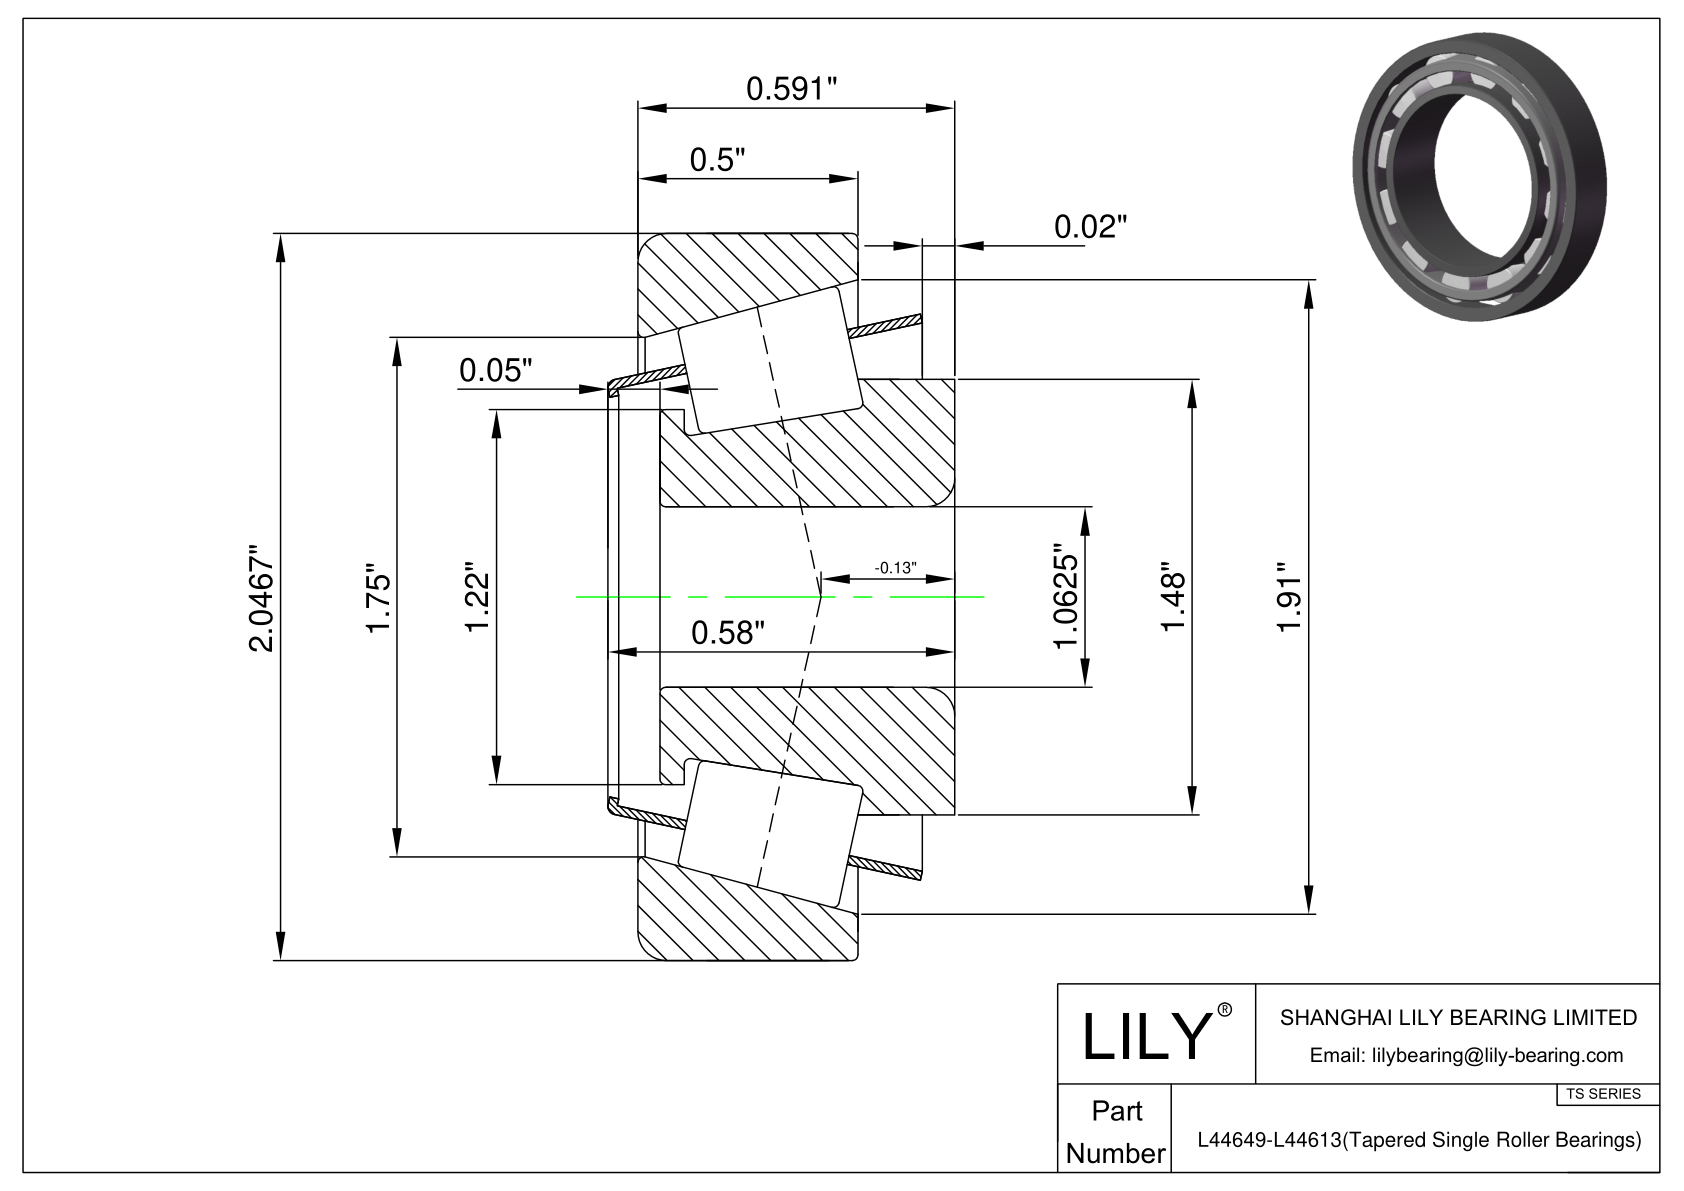 L44649-L44613 TS (Tapered Single Roller Bearings) (Imperial) cad drawing